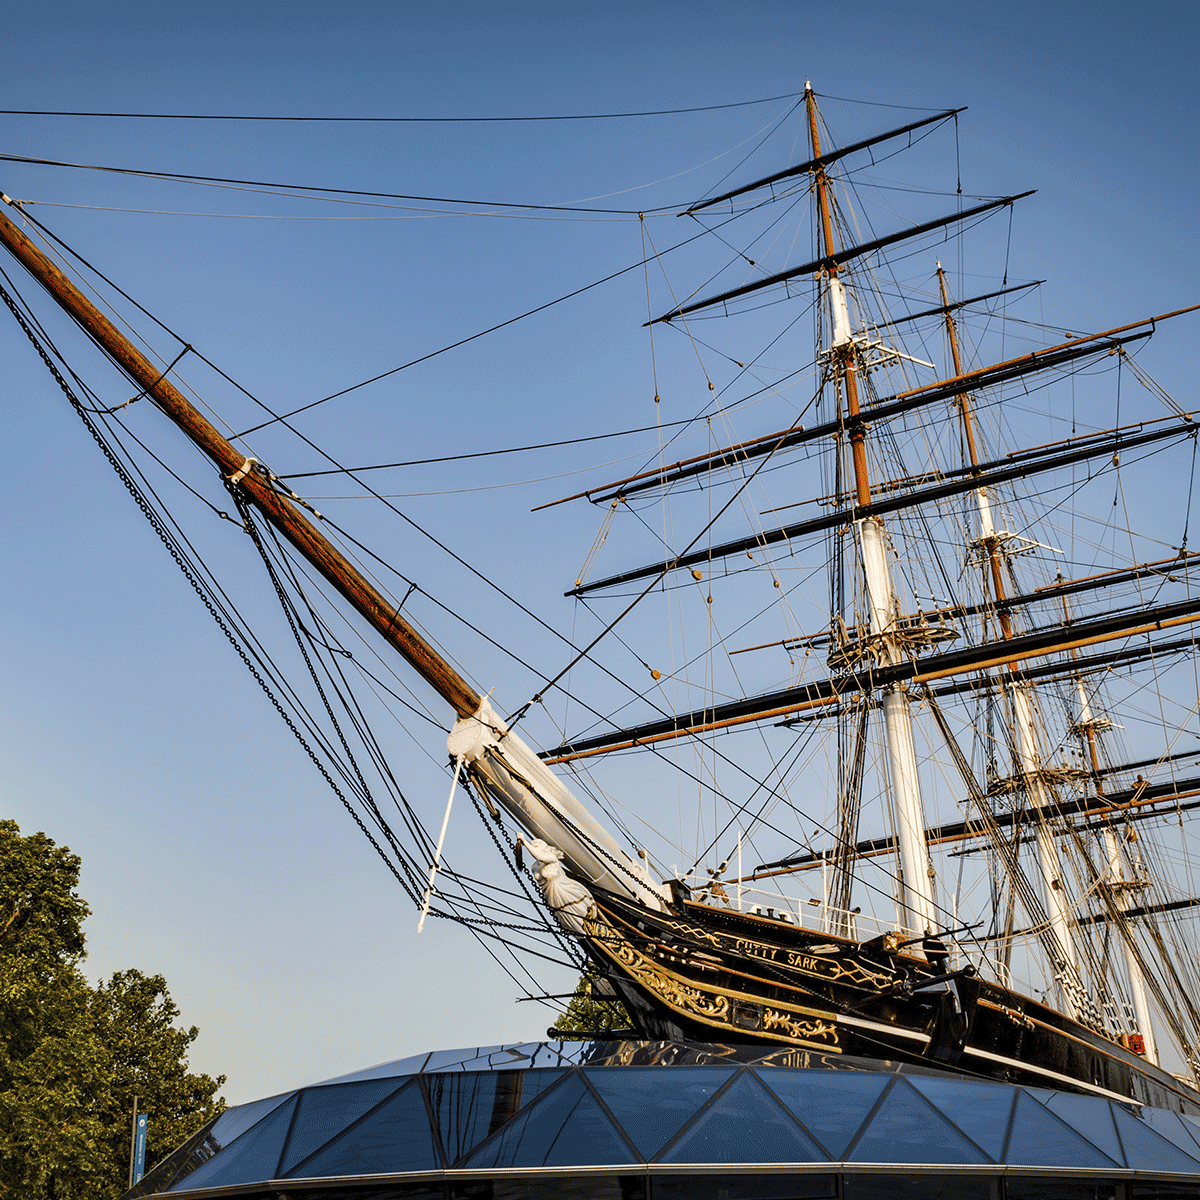 https://www.thetoolroom.co.uk/wp-content/uploads/2015/09/NTR-projects-cutty-sark-1.png